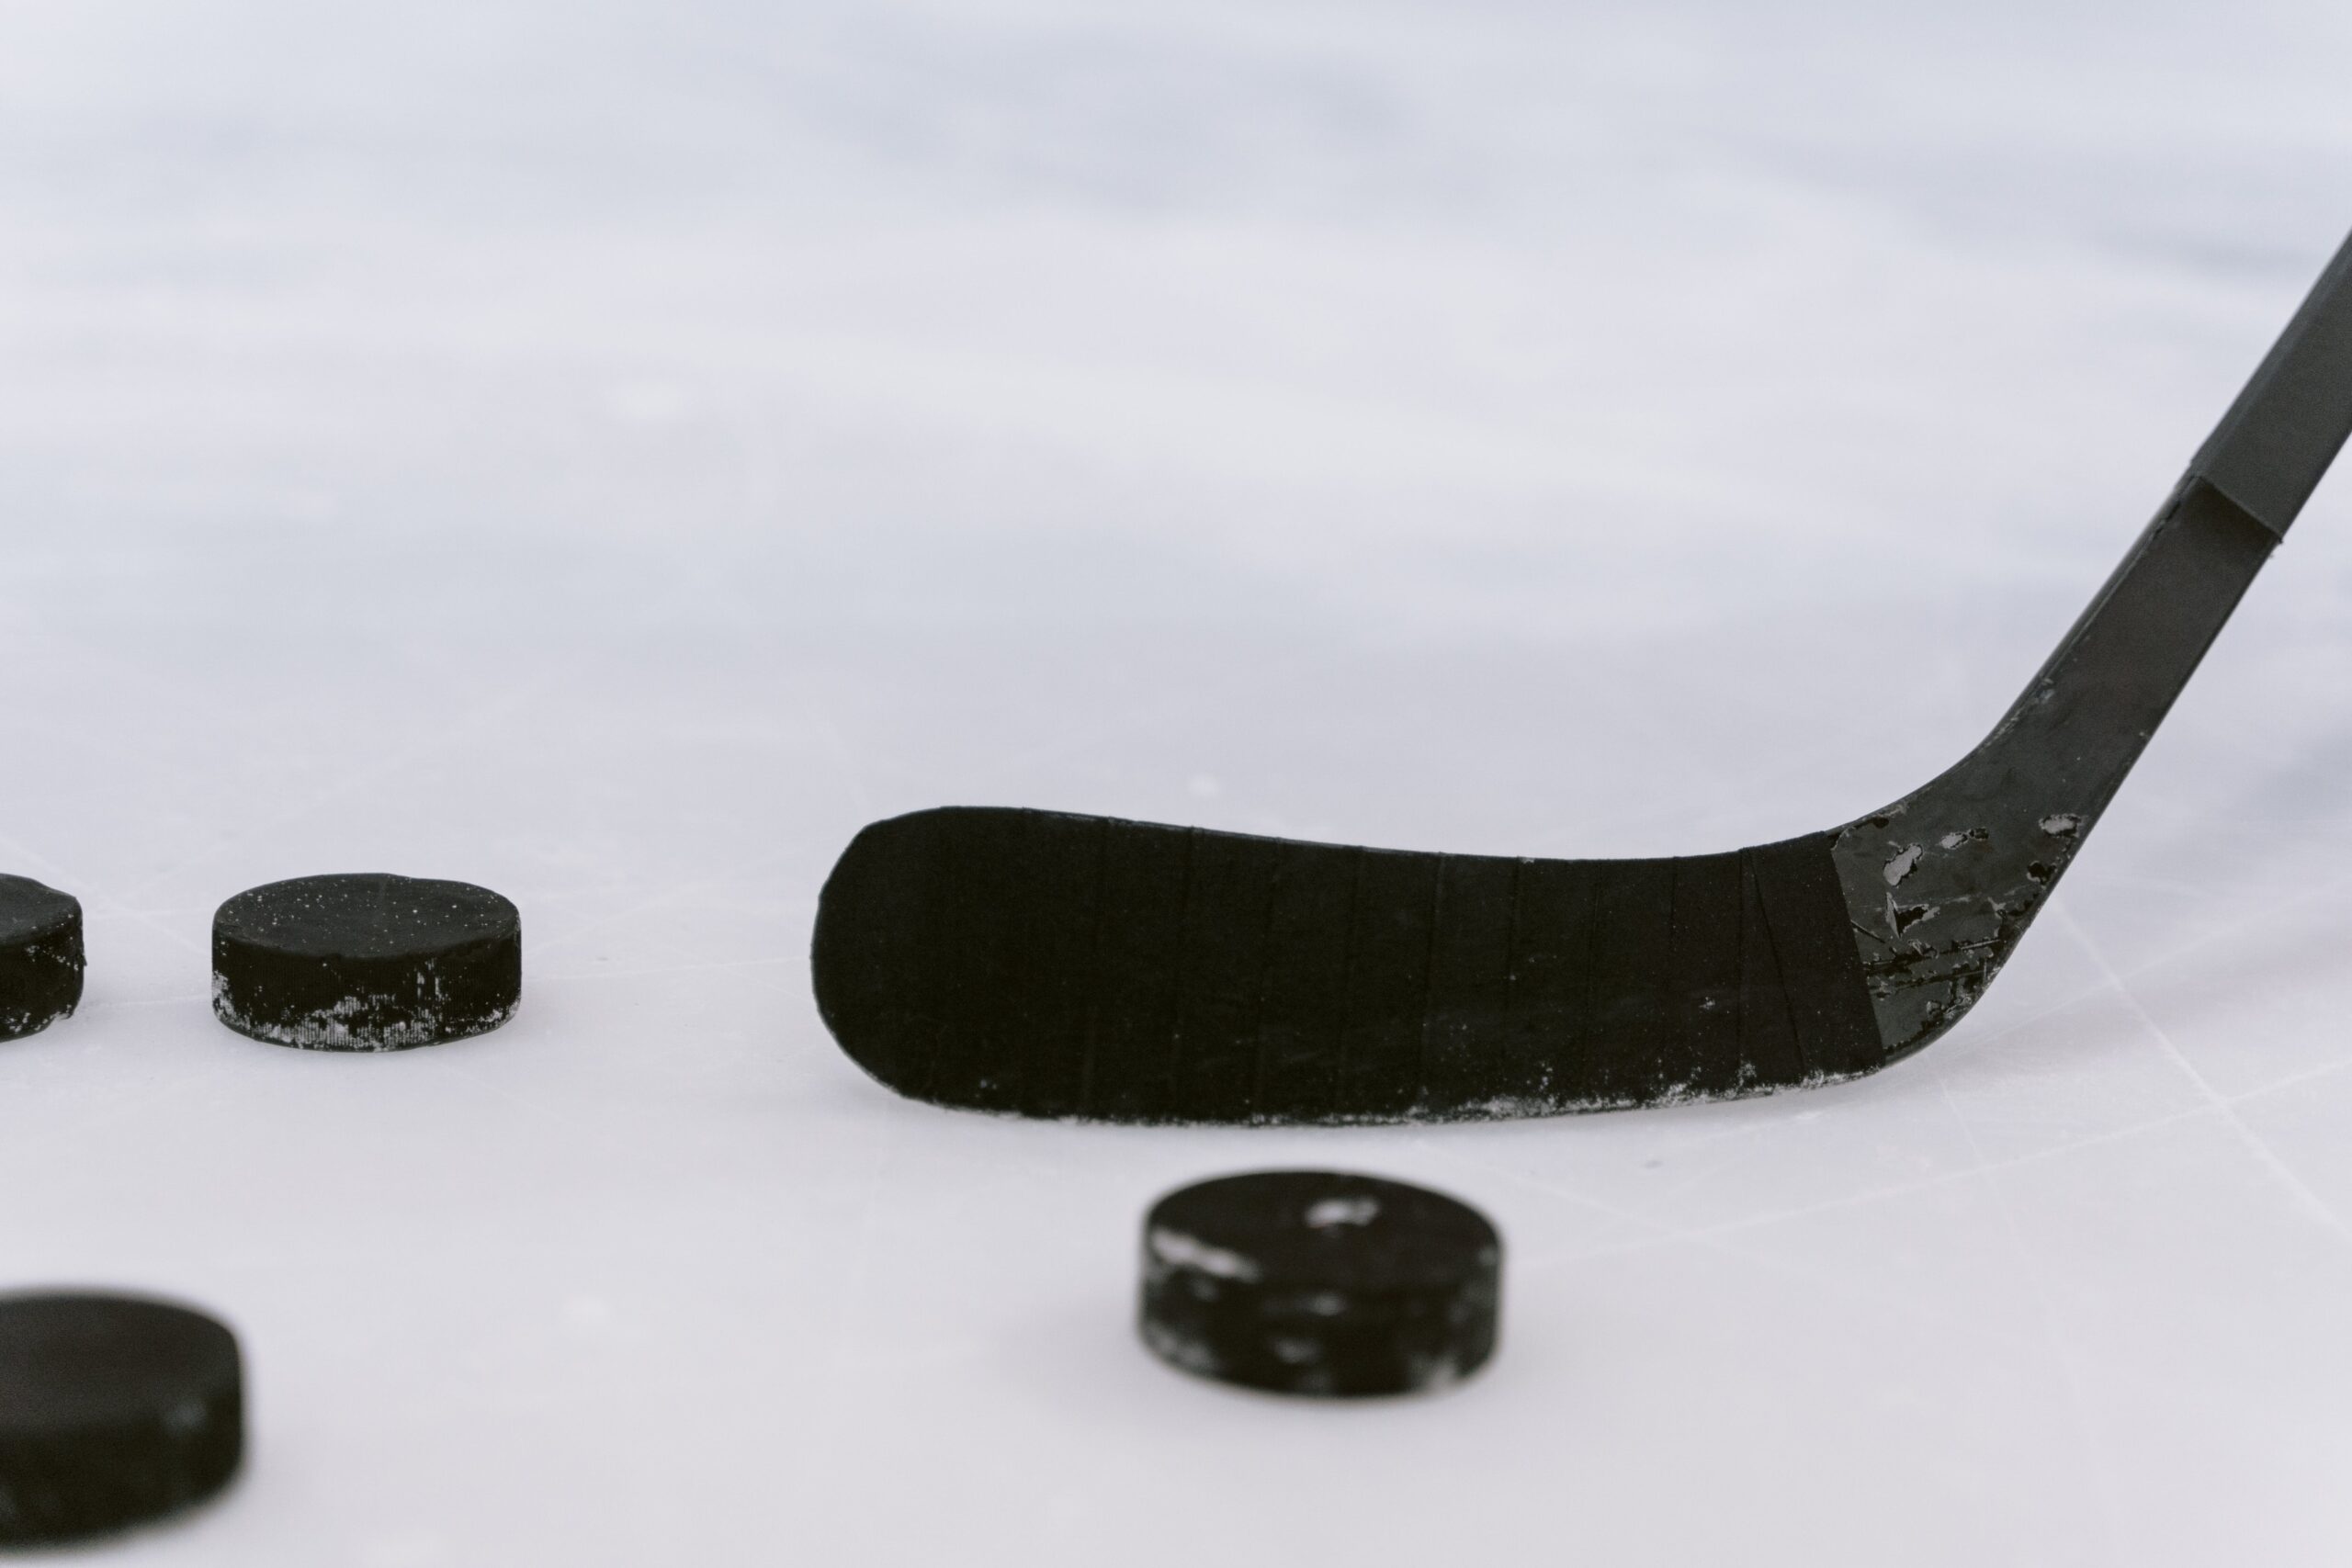 Generic photo of hockey puck and stick on ice